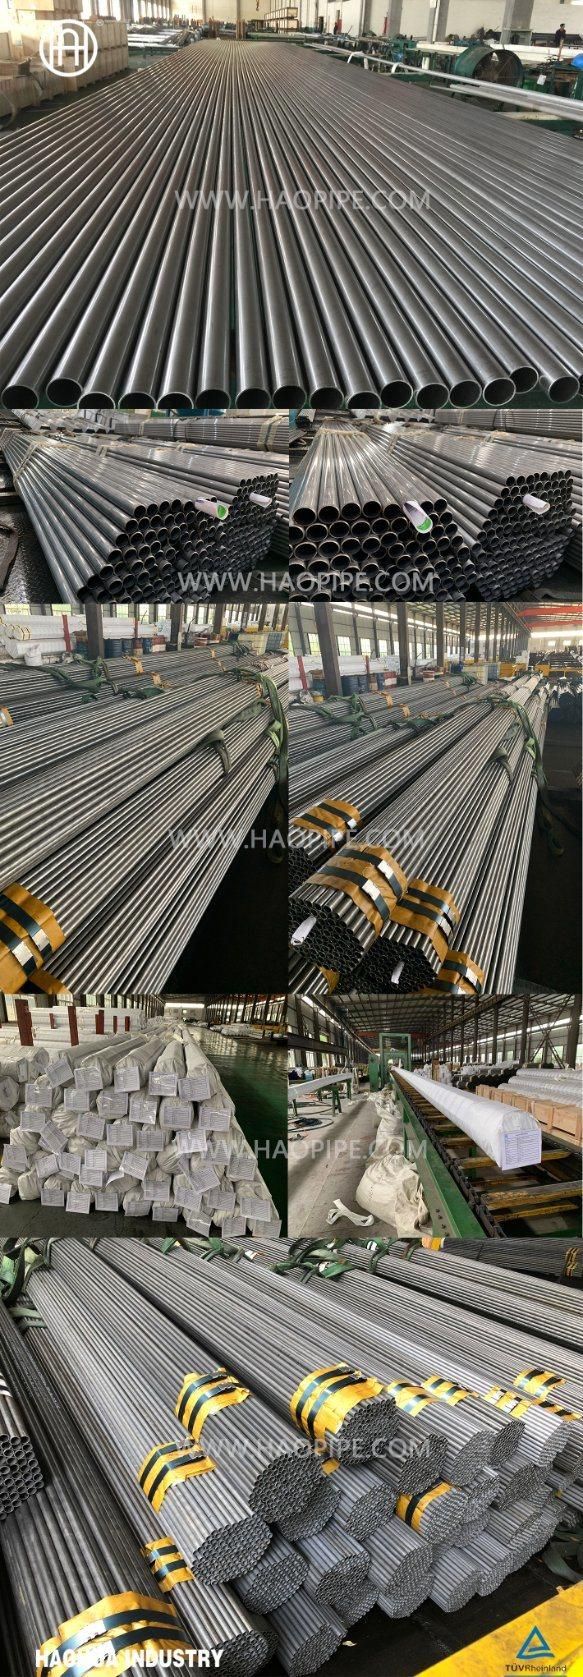 Carbon Steel Tube ASTM A336 Cold Drawn Nace Mr0175/ISO 15156